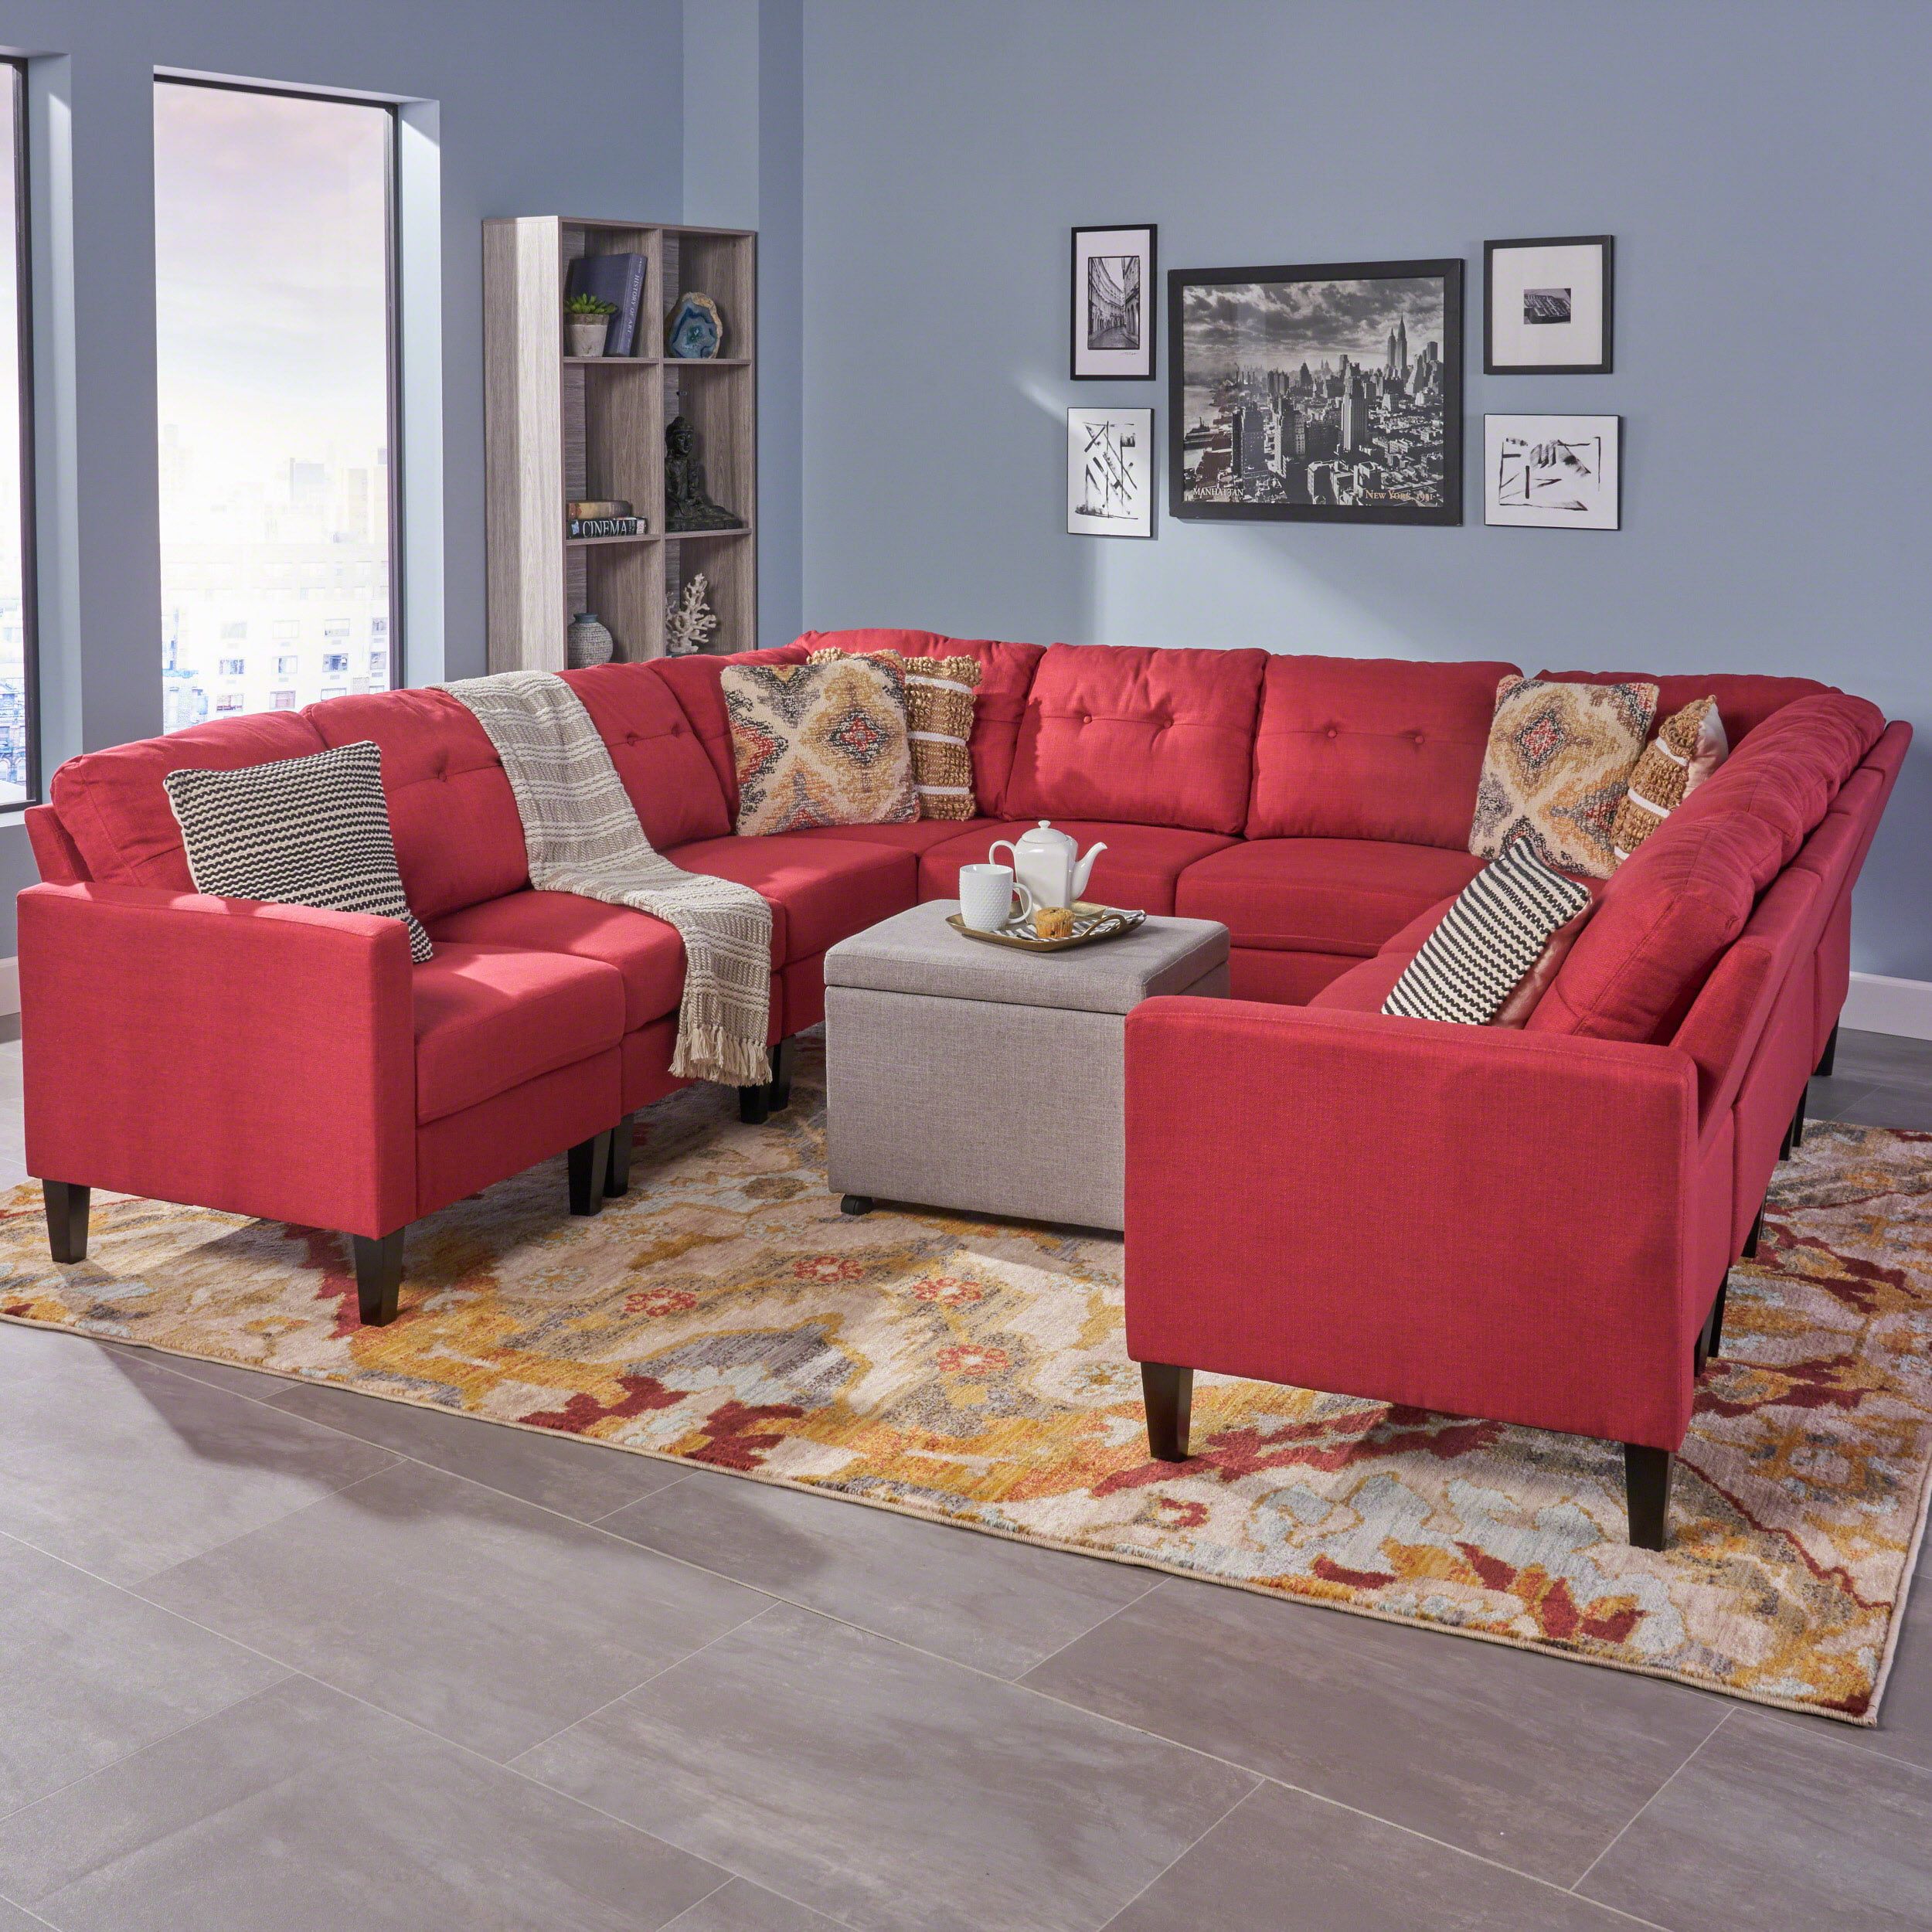 Marsh Mid Century Modern U Shaped Sectional Sofa Set, Red – Walmart Within Modern U Shaped Sectional Couch Sets (Gallery 1 of 20)